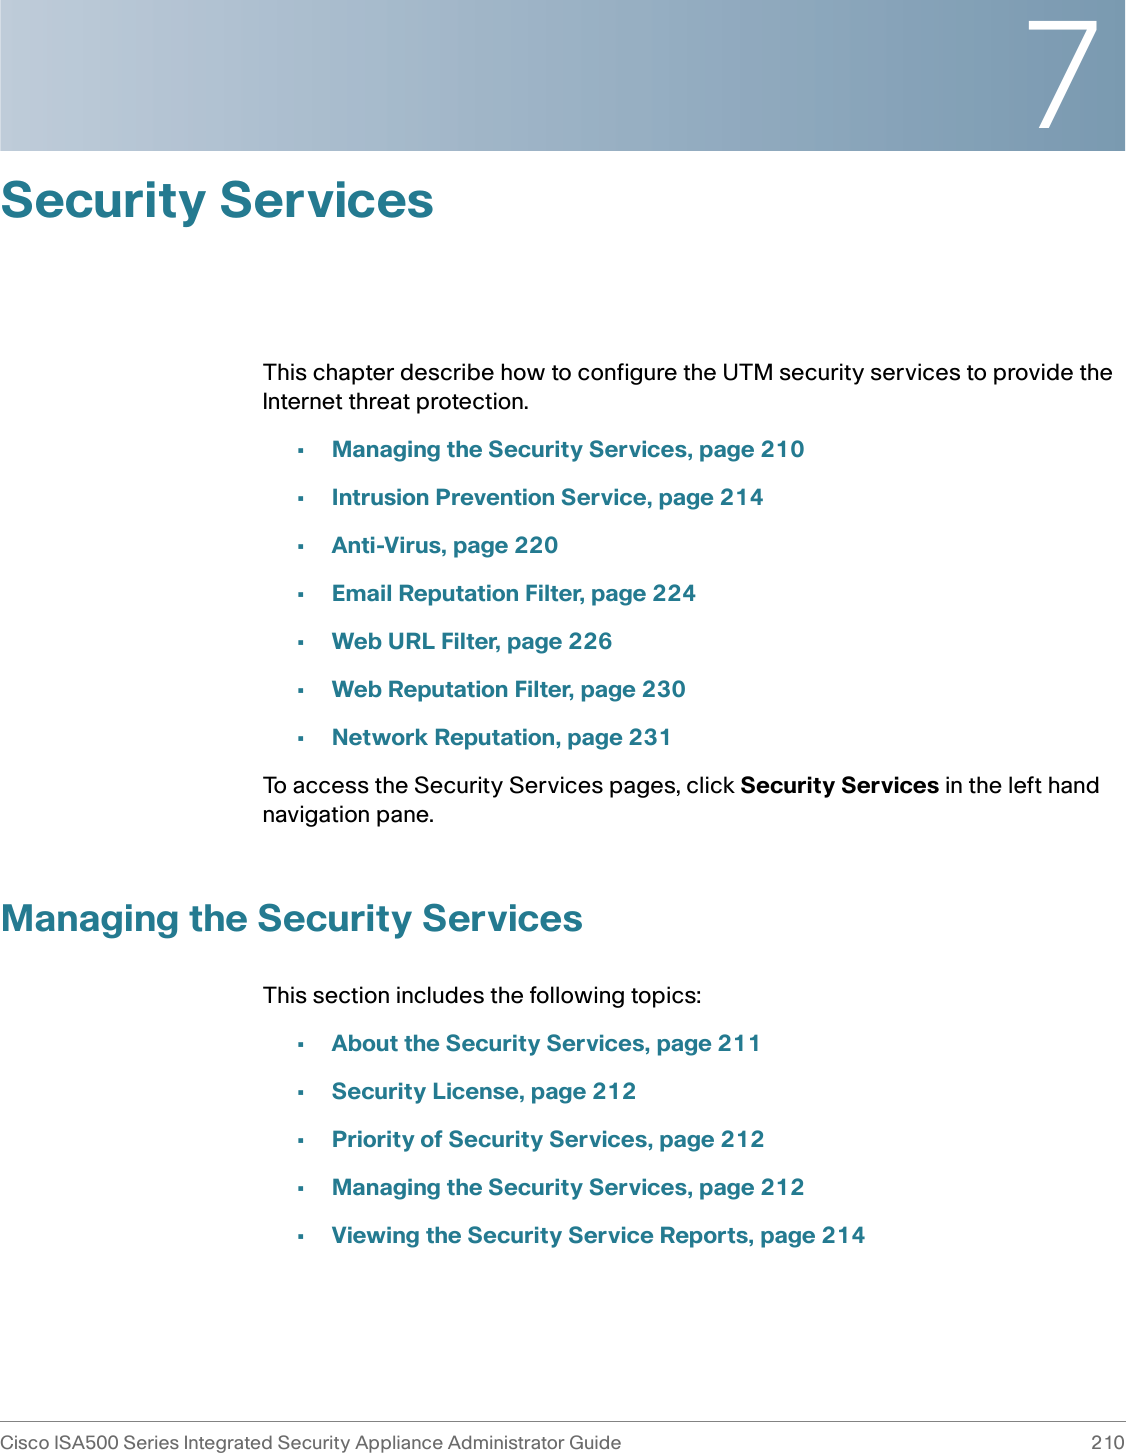 7Cisco ISA500 Series Integrated Security Appliance Administrator Guide 210 Security ServicesThis chapter describe how to configure the UTM security services to provide the Internet threat protection. •Managing the Security Services, page 210•Intrusion Prevention Service, page 214•Anti-Virus, page 220•Email Reputation Filter, page 224•Web URL Filter, page 226•Web Reputation Filter, page 230•Network Reputation, page 231To access the Security Services pages, click Security Services in the left hand navigation pane.Managing the Security ServicesThis section includes the following topics:•About the Security Services, page 211•Security License, page 212•Priority of Security Services, page 212•Managing the Security Services, page 212•Viewing the Security Service Reports, page 214